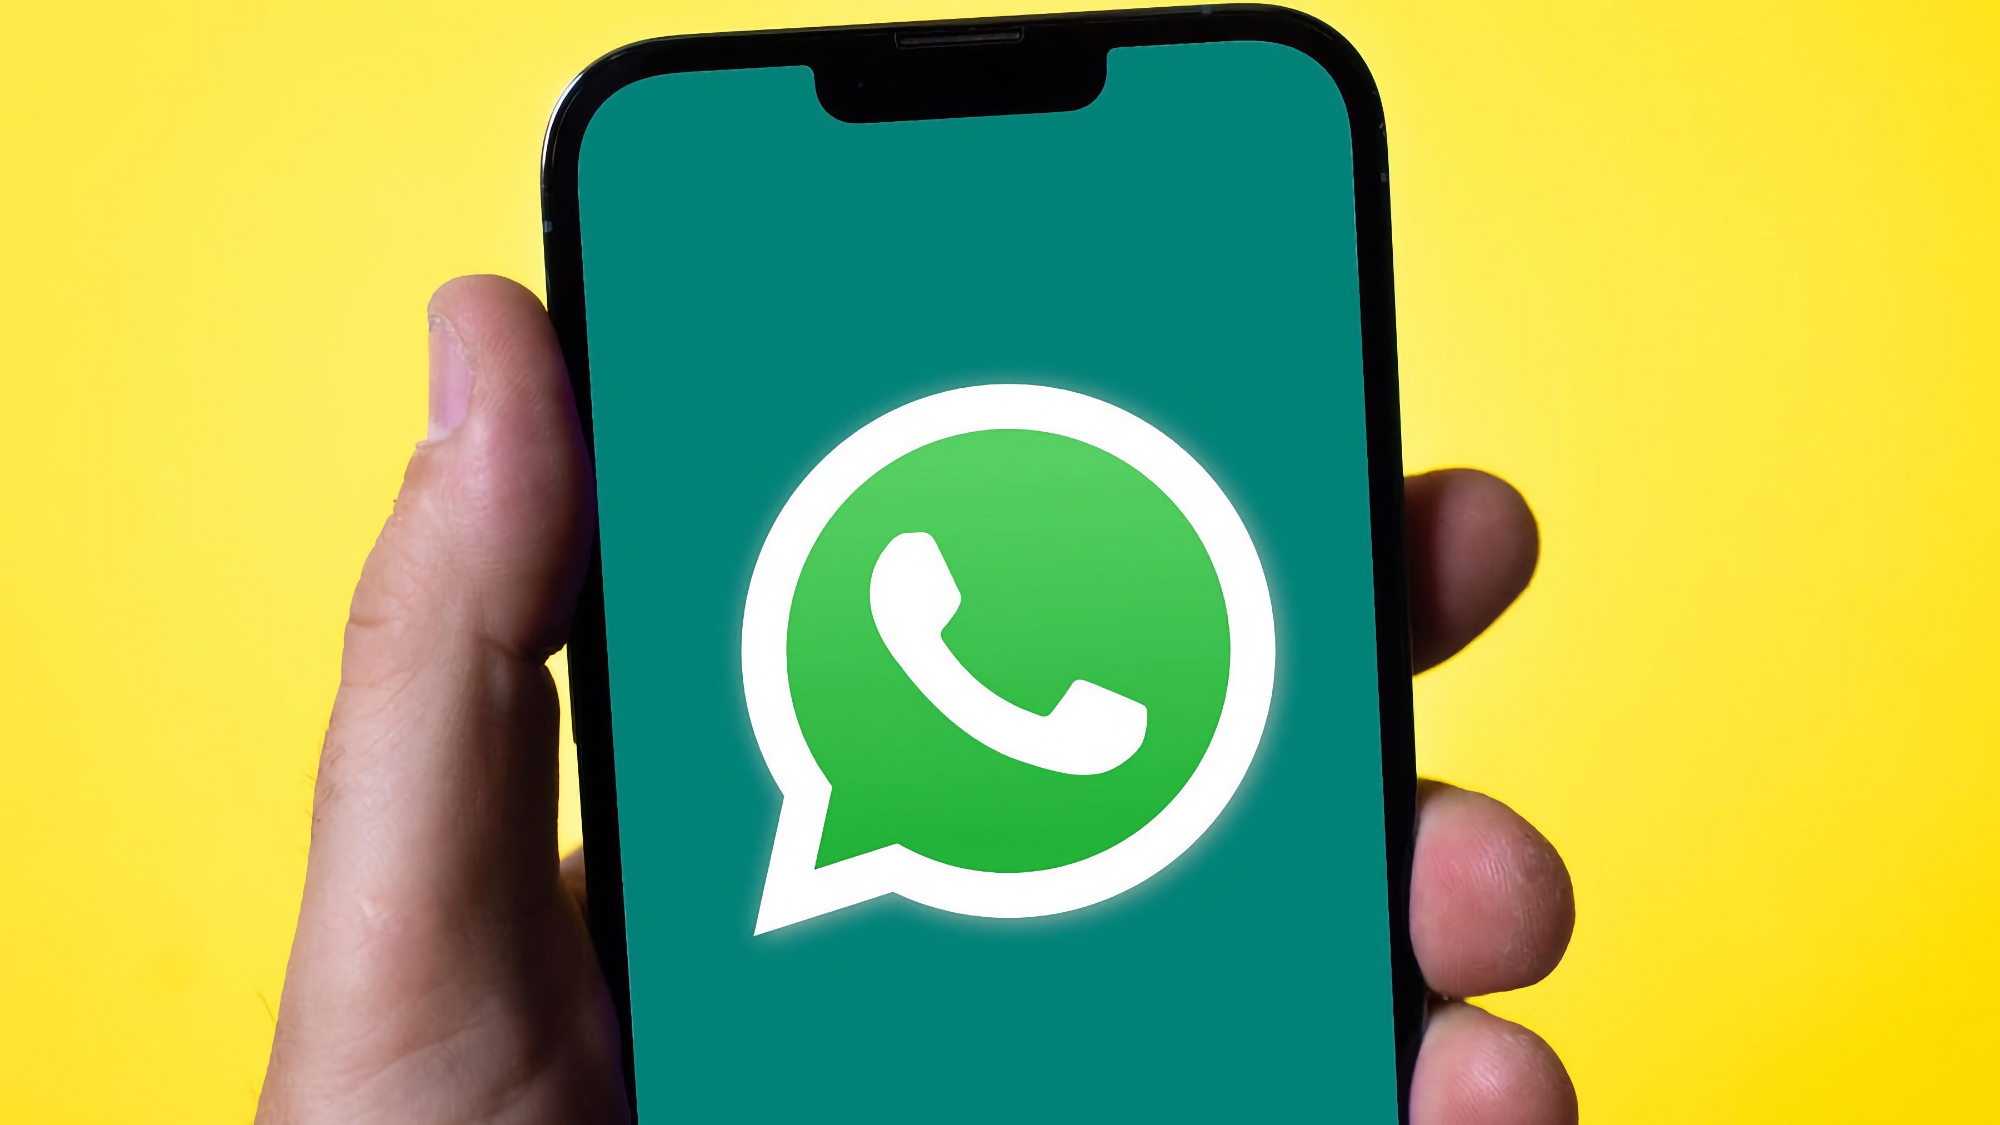 iPhone users get Picture-in-Picture support for video calls on WhatsApp